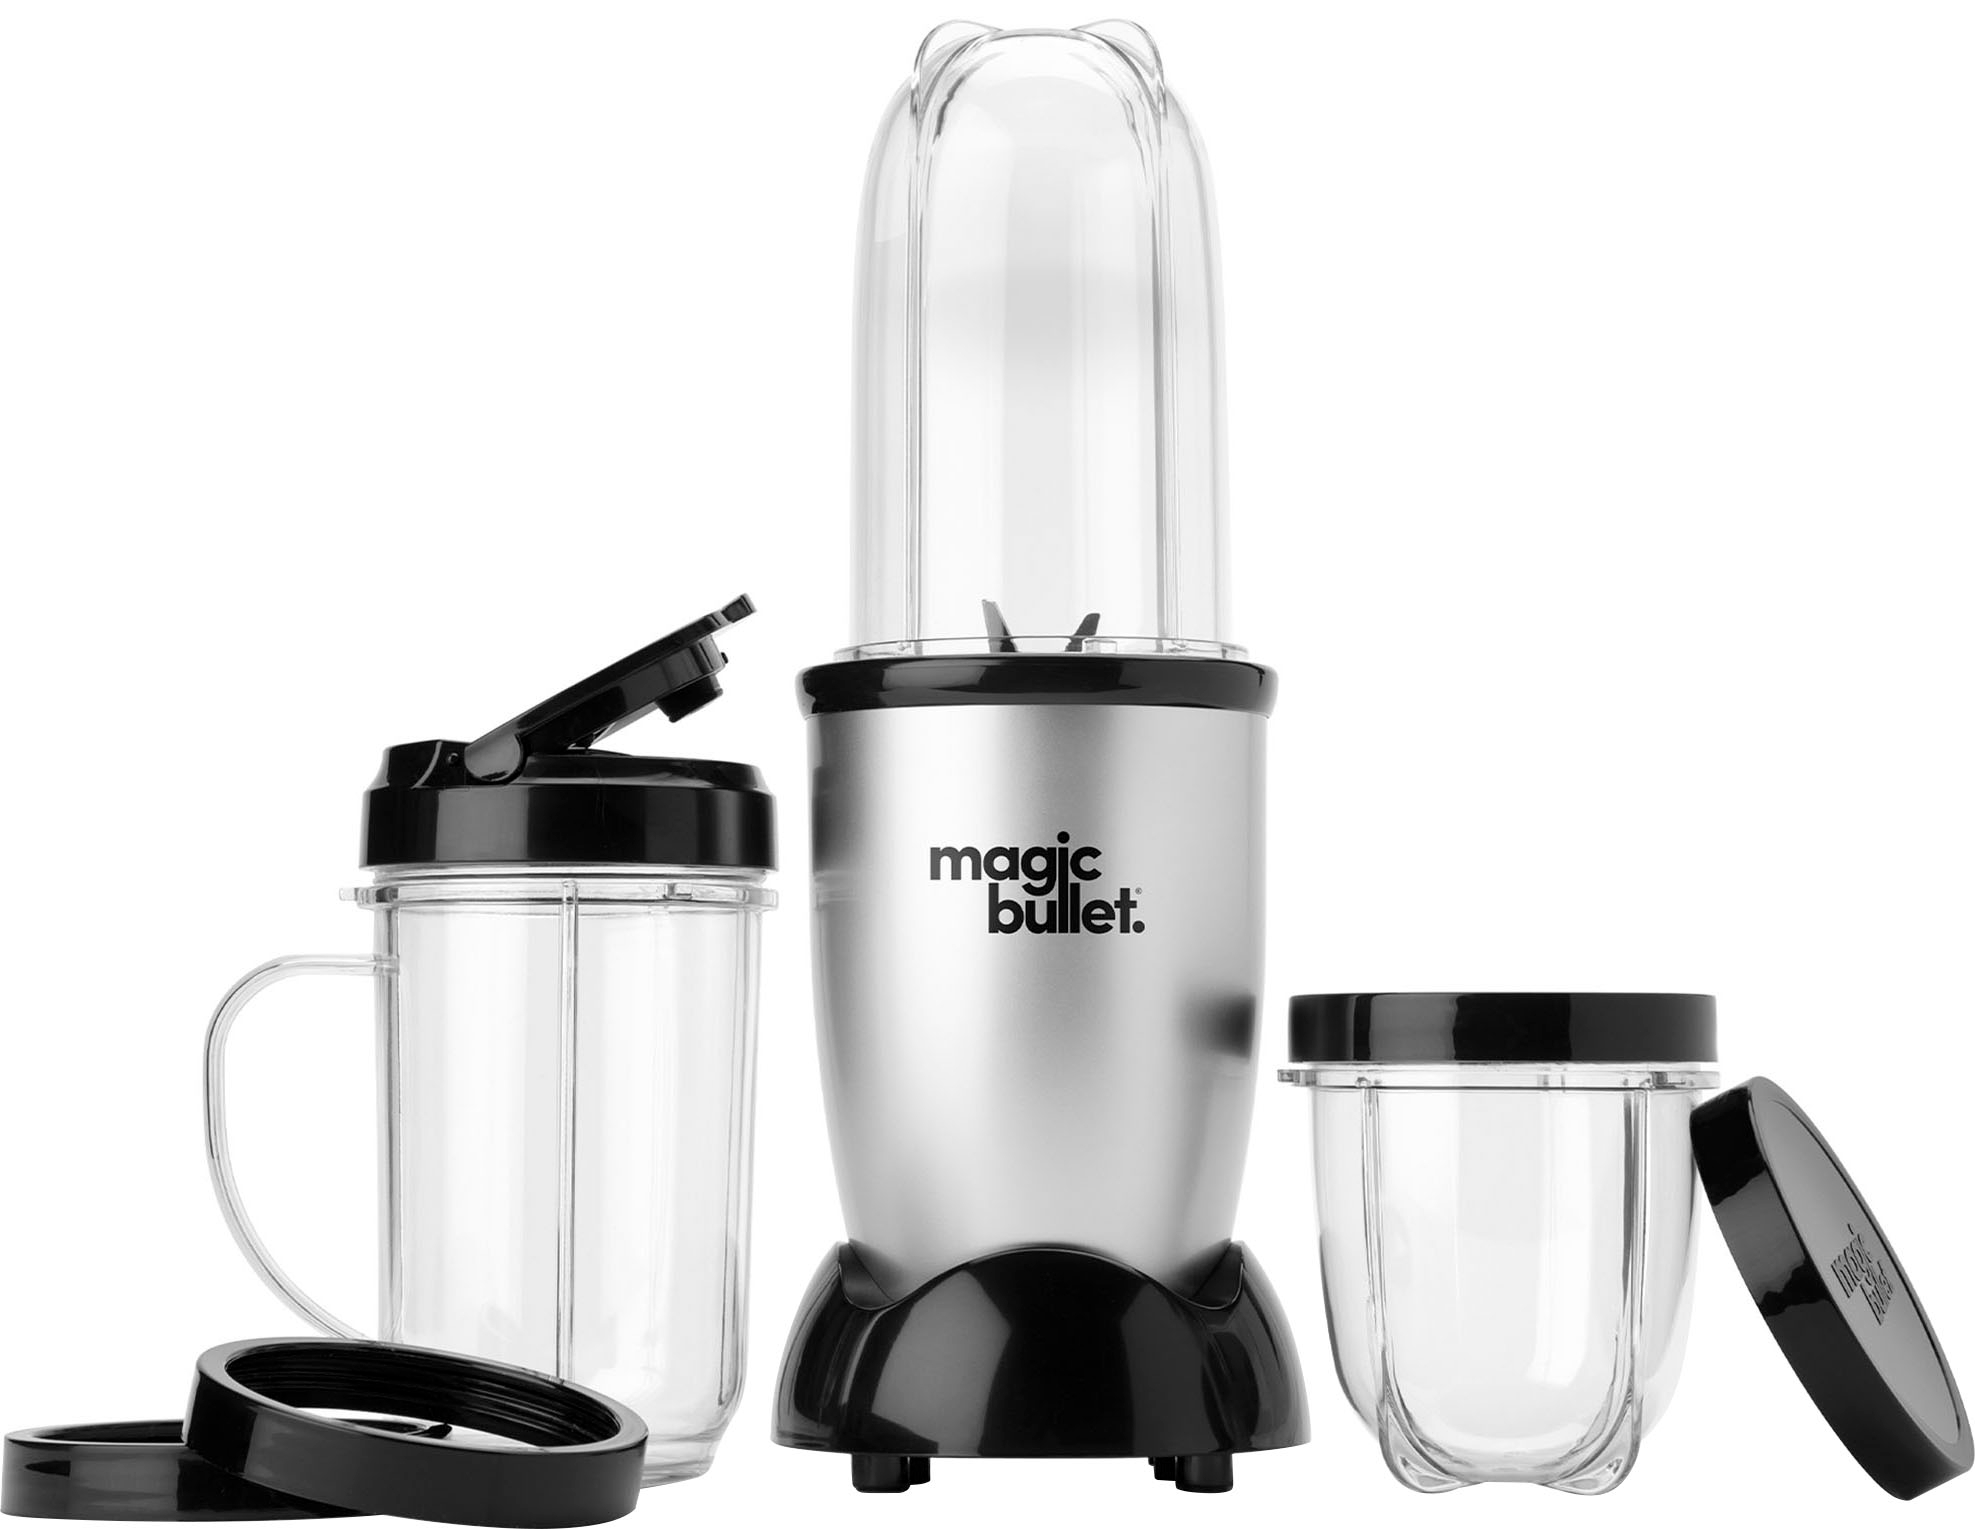 Hamilton Beach Personal Creations™ Blender with Travel Lid